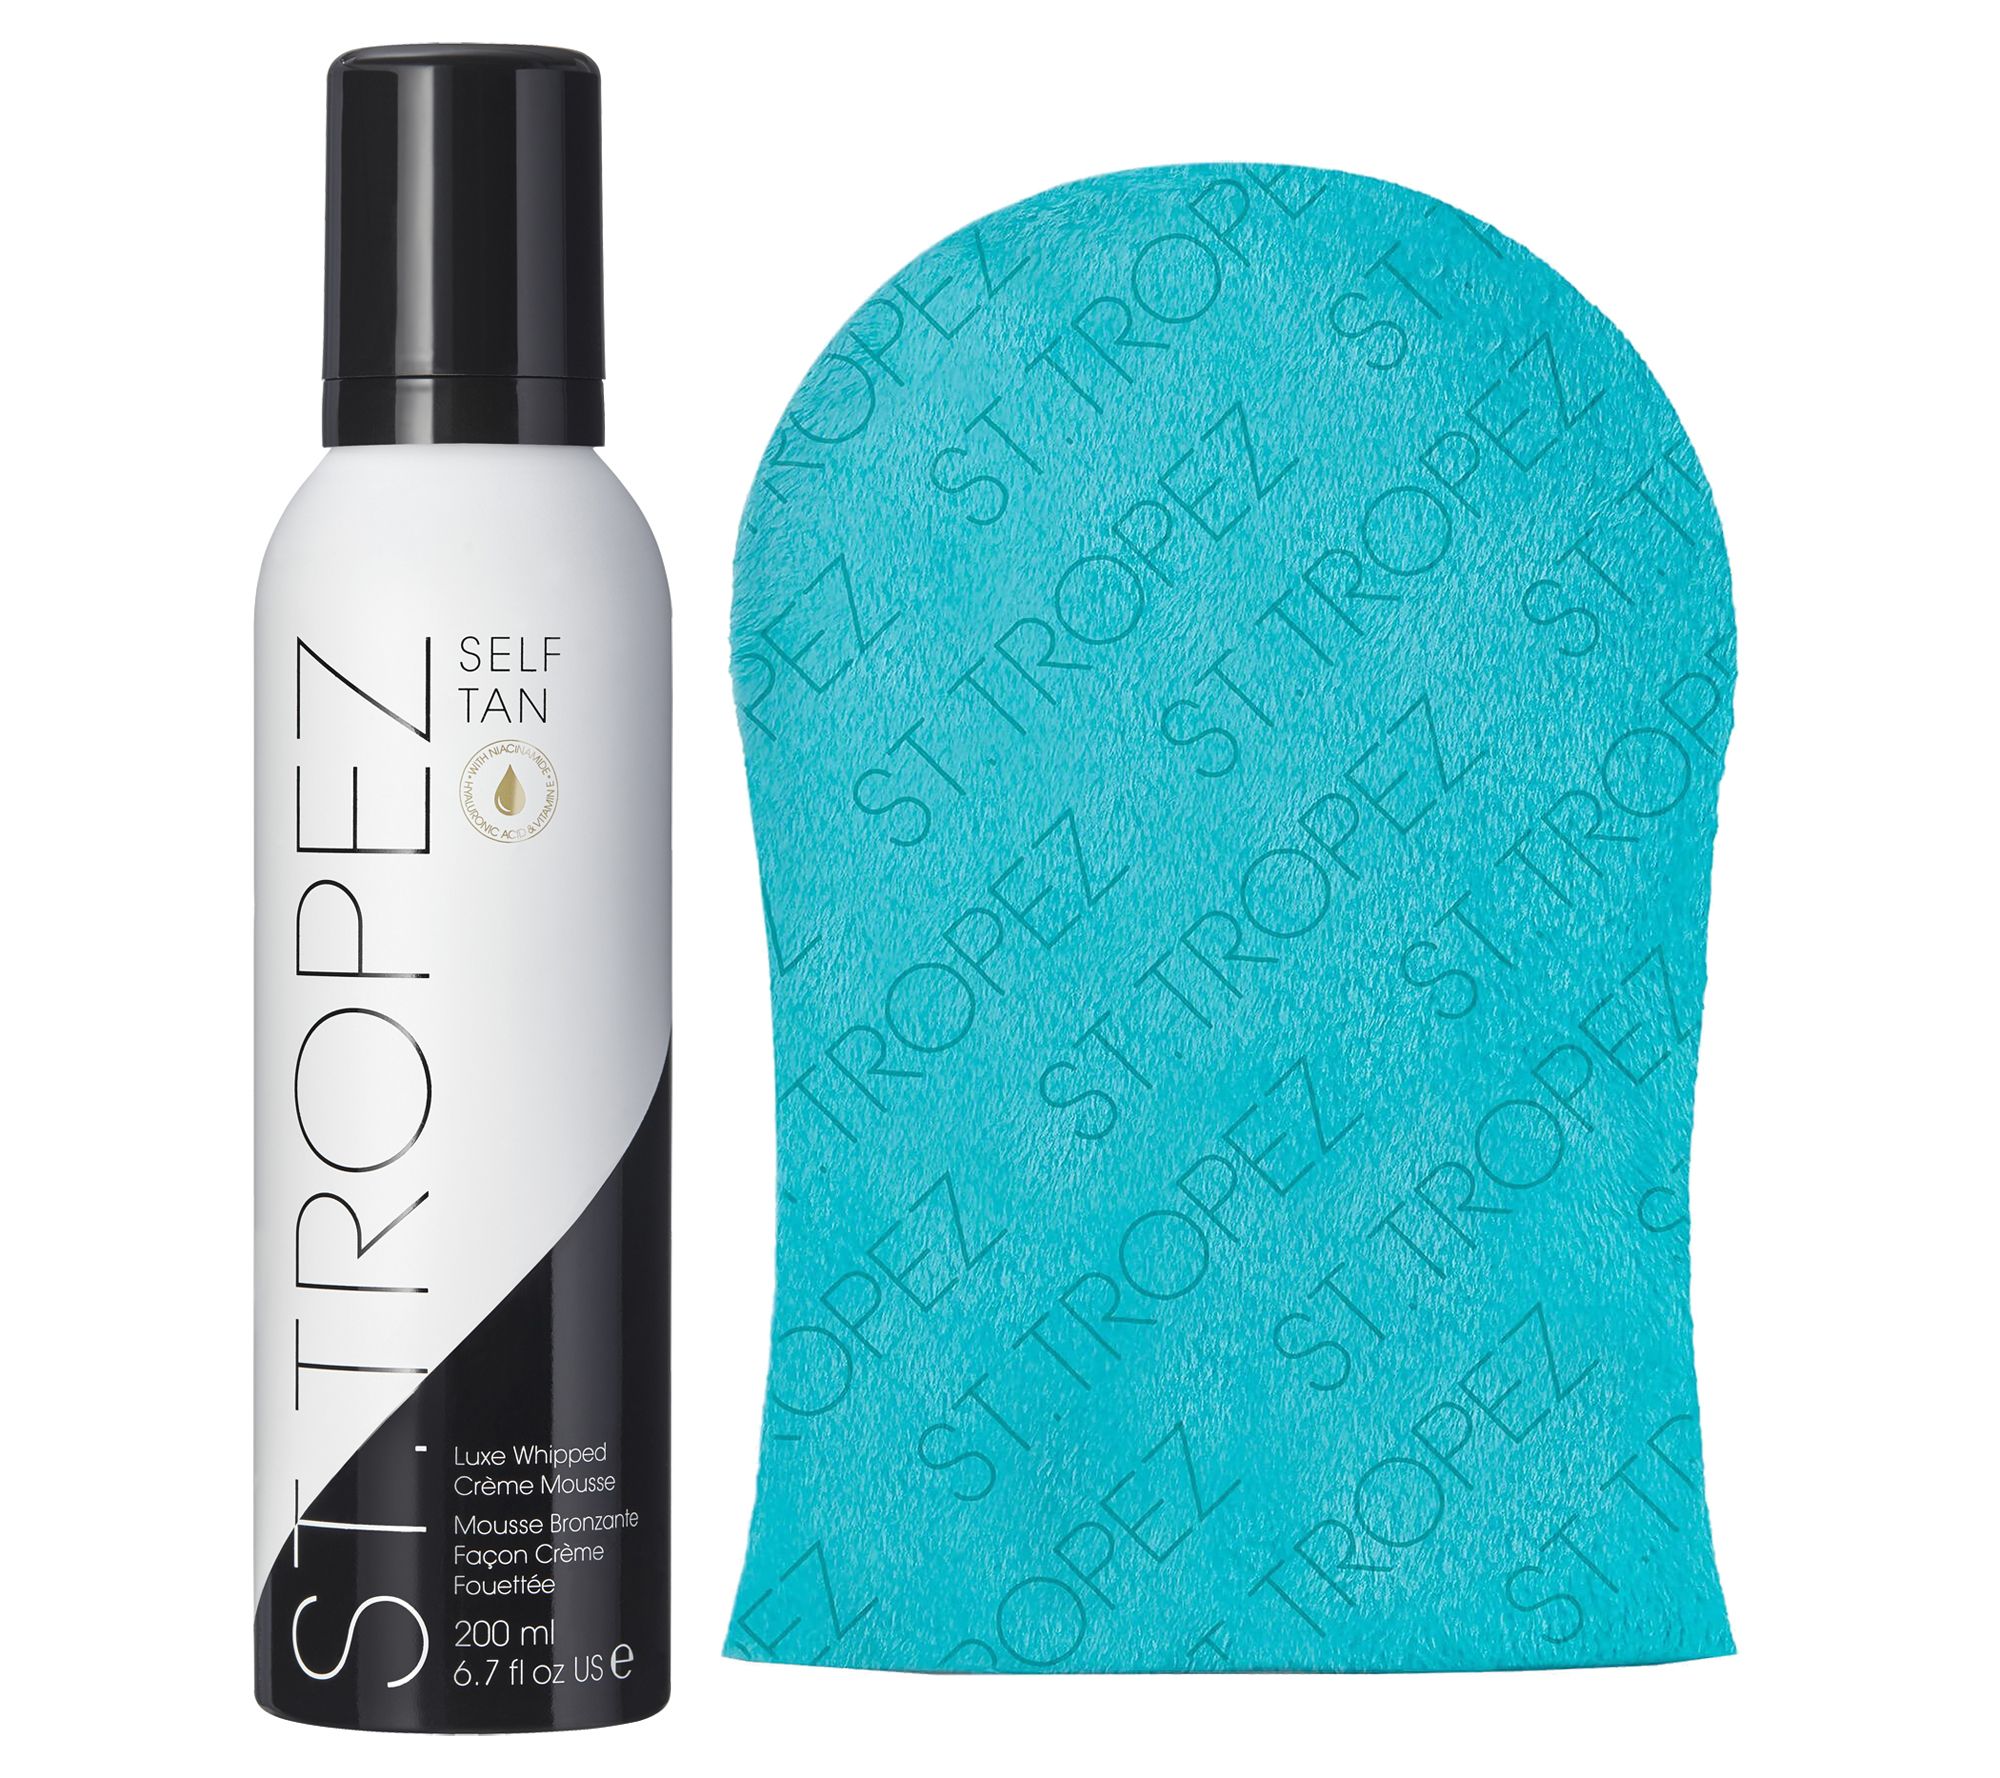 St. Tropez Luxe Self Creme Whipped with Mousse Tan Mitt